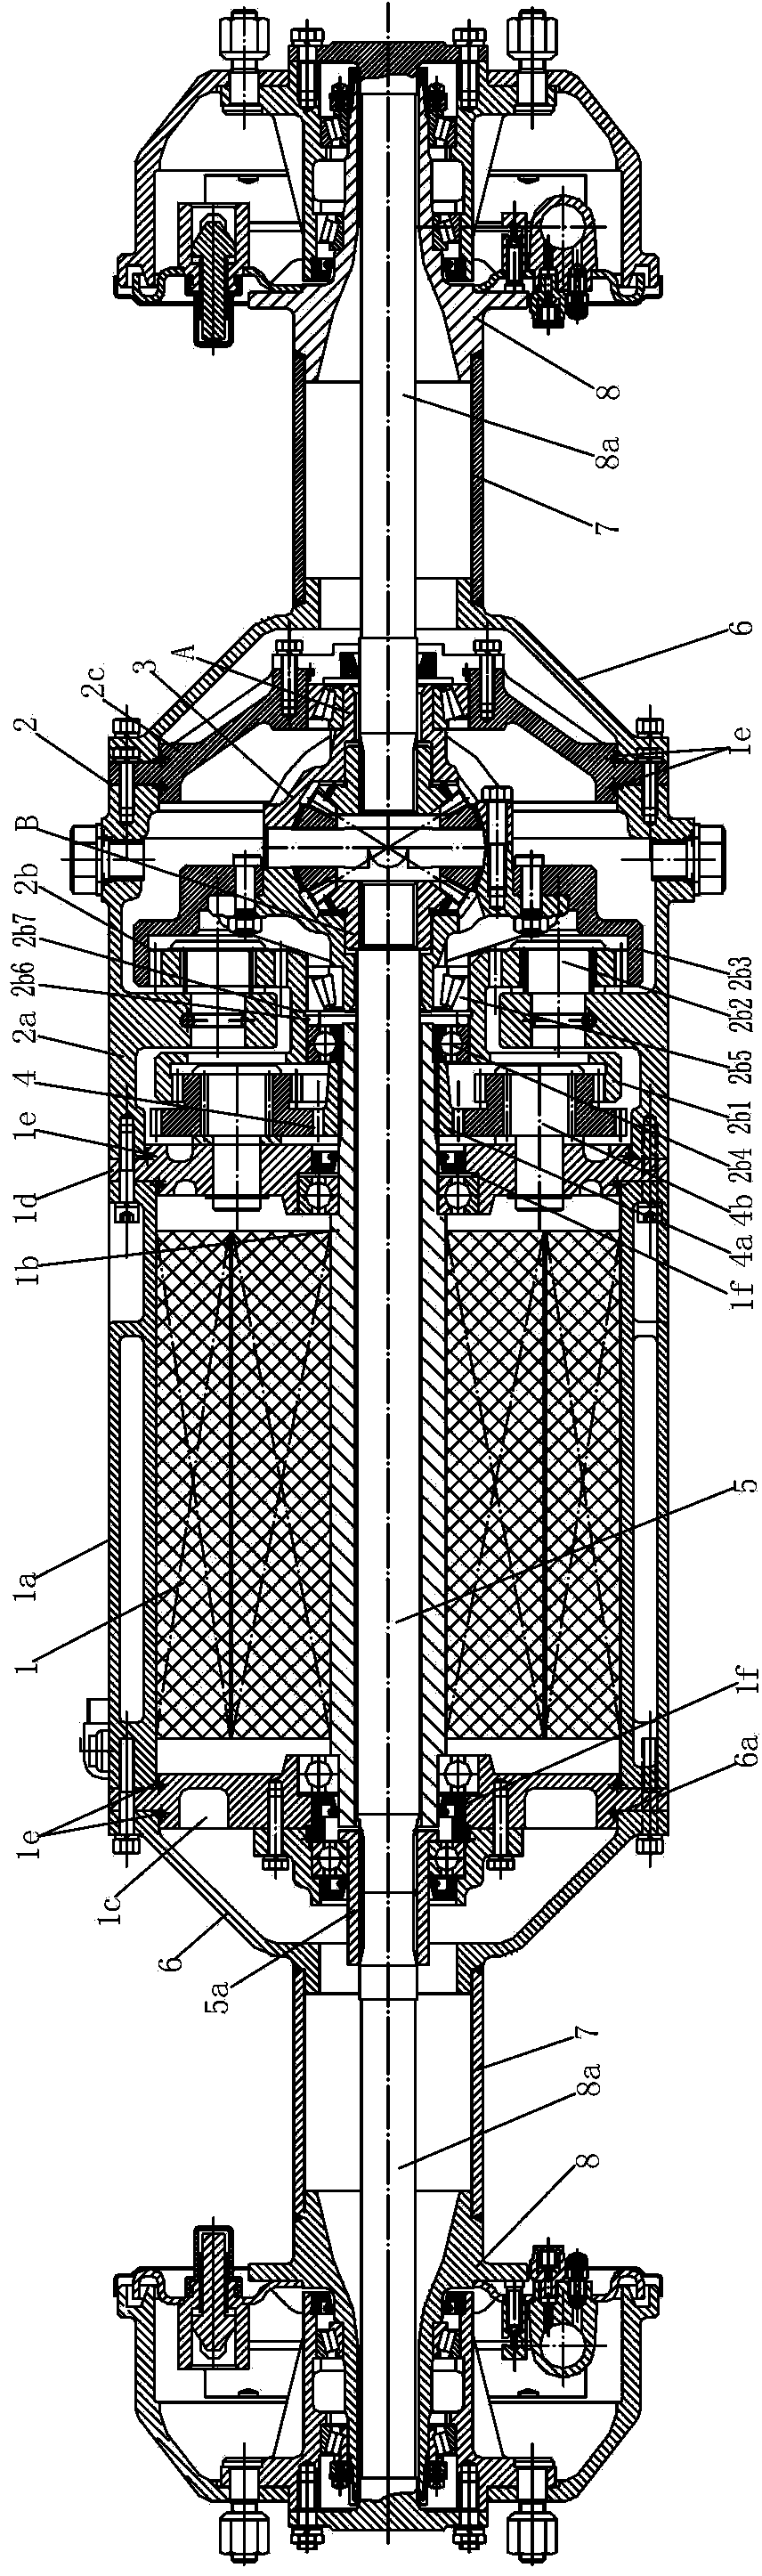 Torque conversion differential assembly of coaxial motor